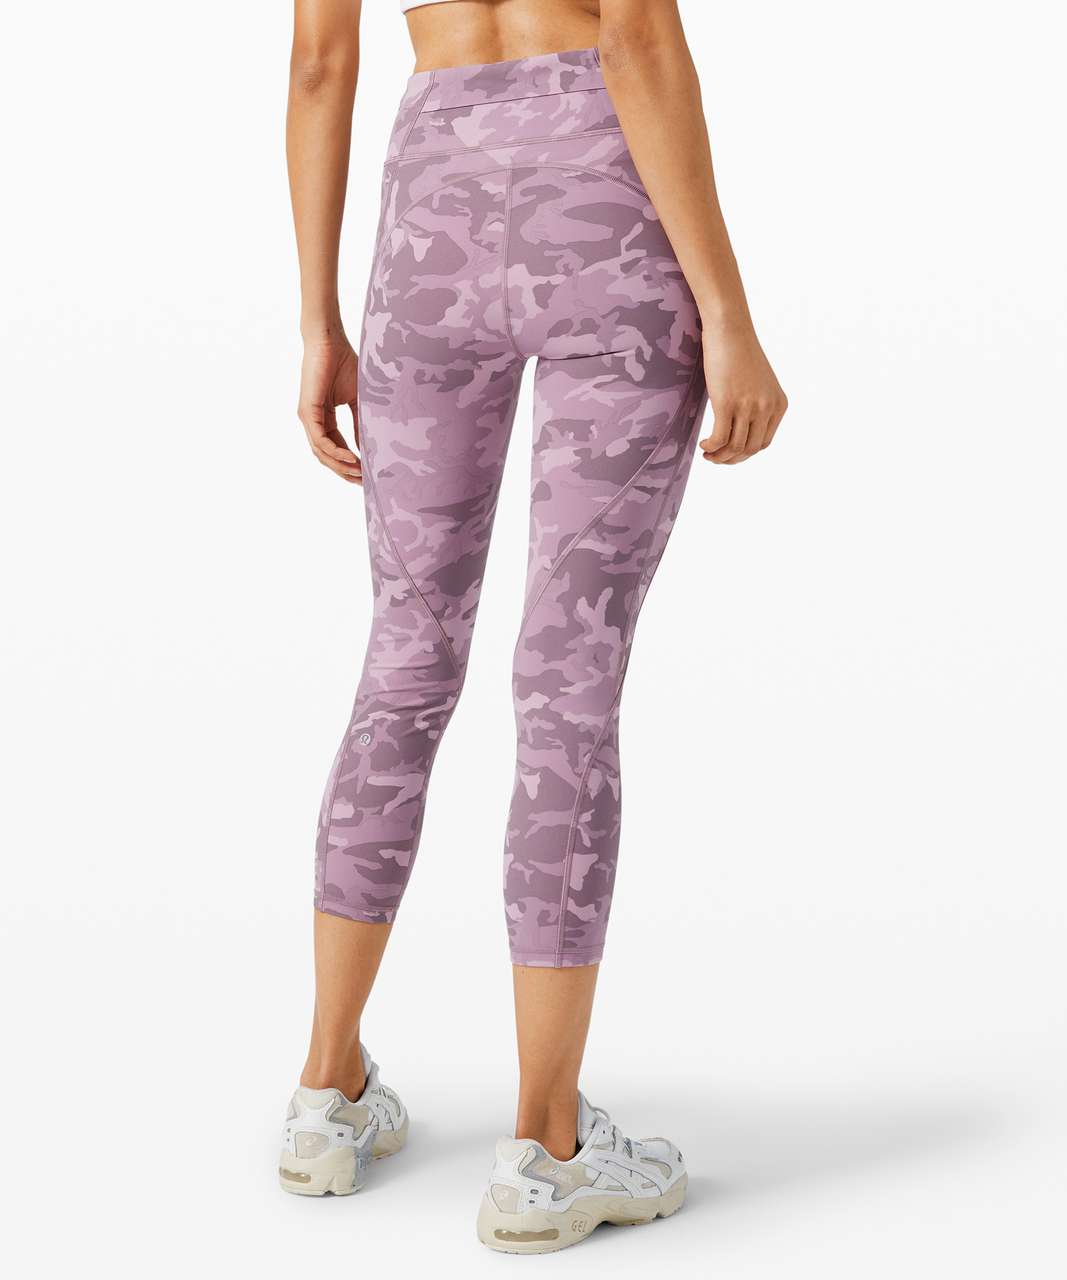 Lululemon Time To Sweat Crop 23" - Incognito Camo Pink Taupe Multi